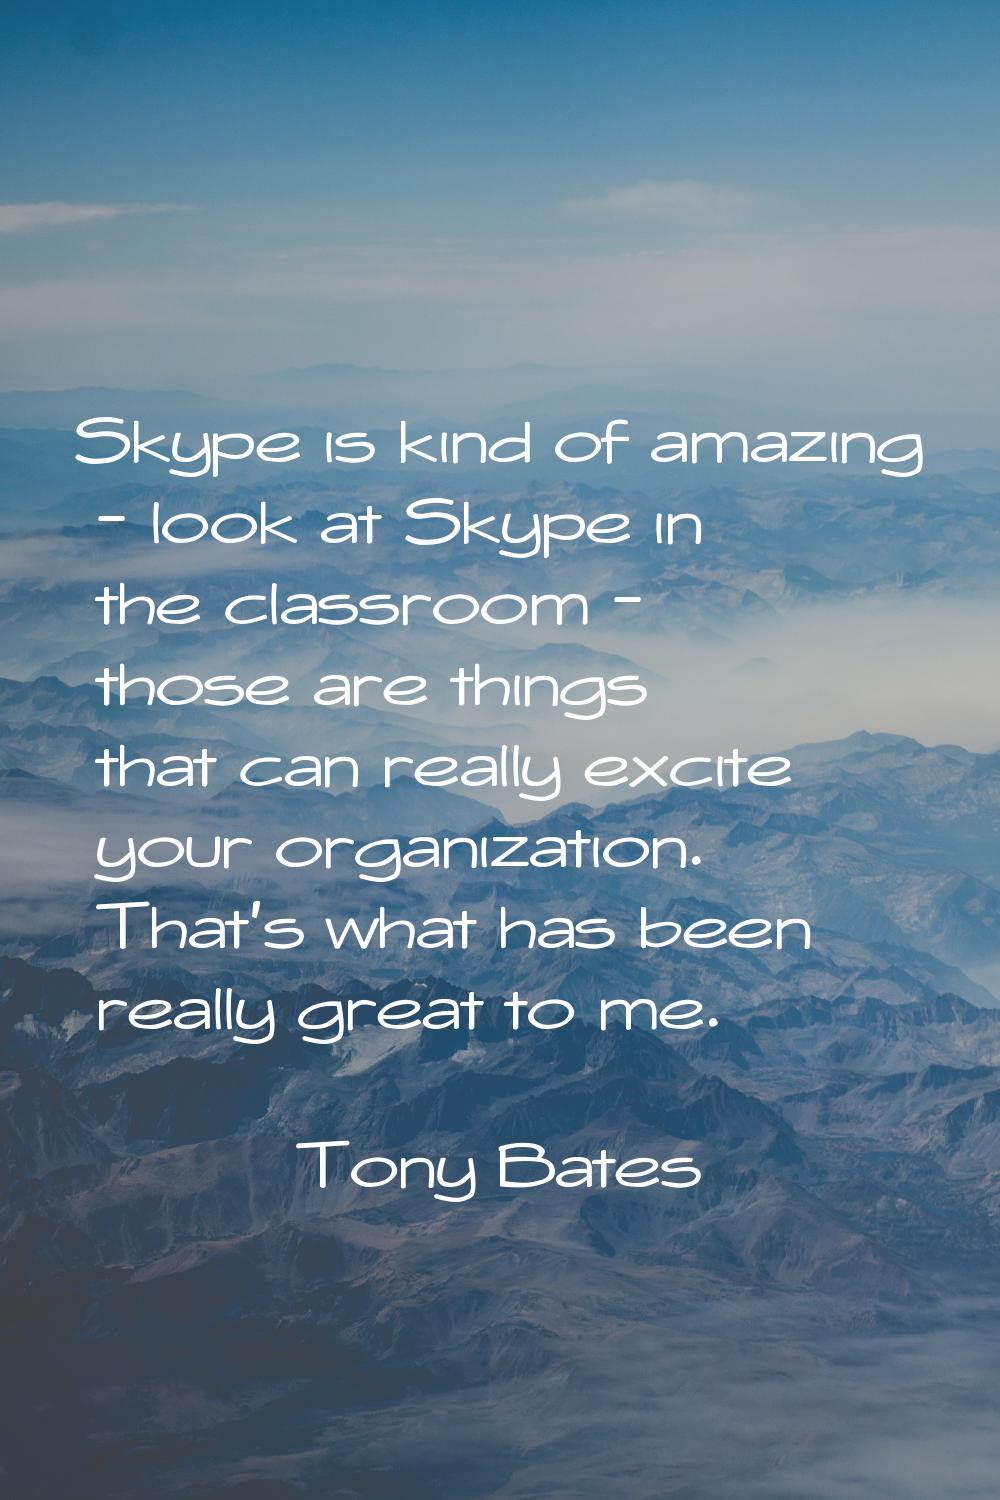 Skype is kind of amazing - look at Skype in the classroom - those are things that can really excite